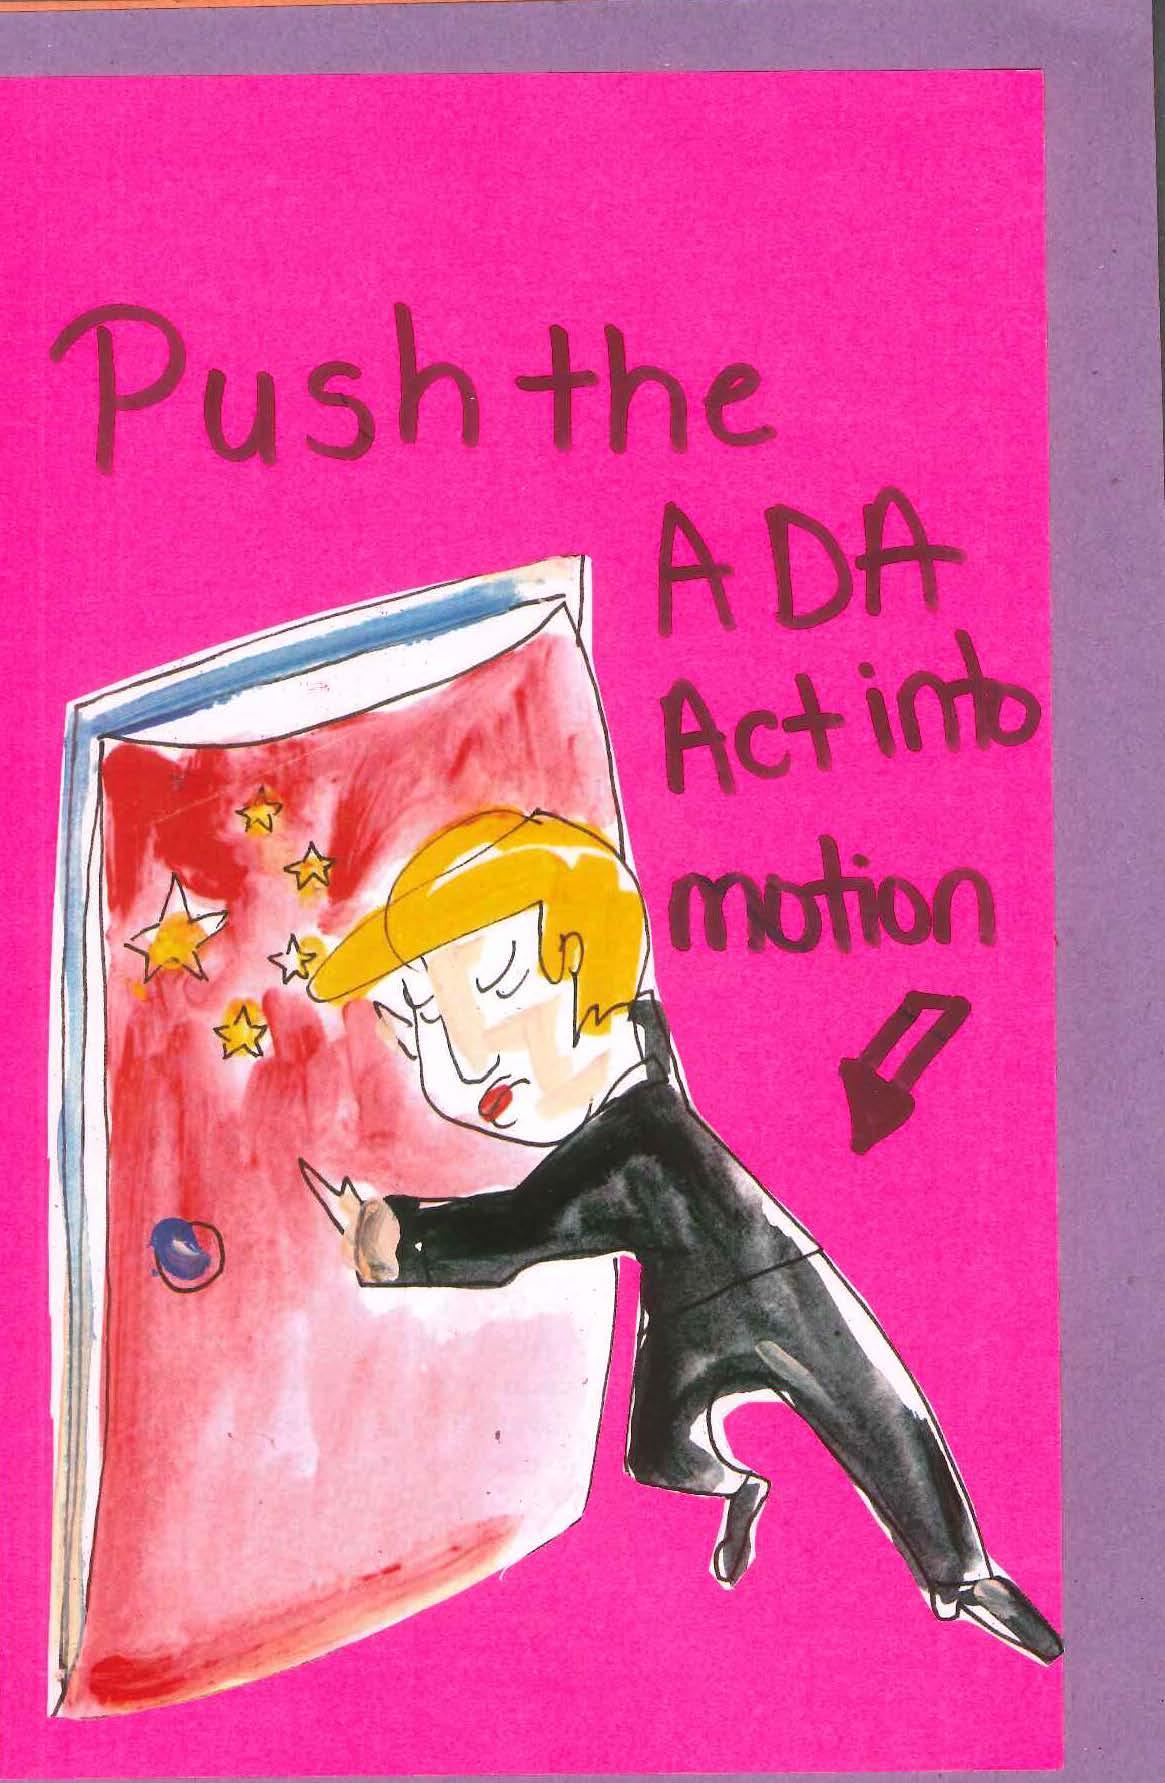 "Push the ADA into motion"